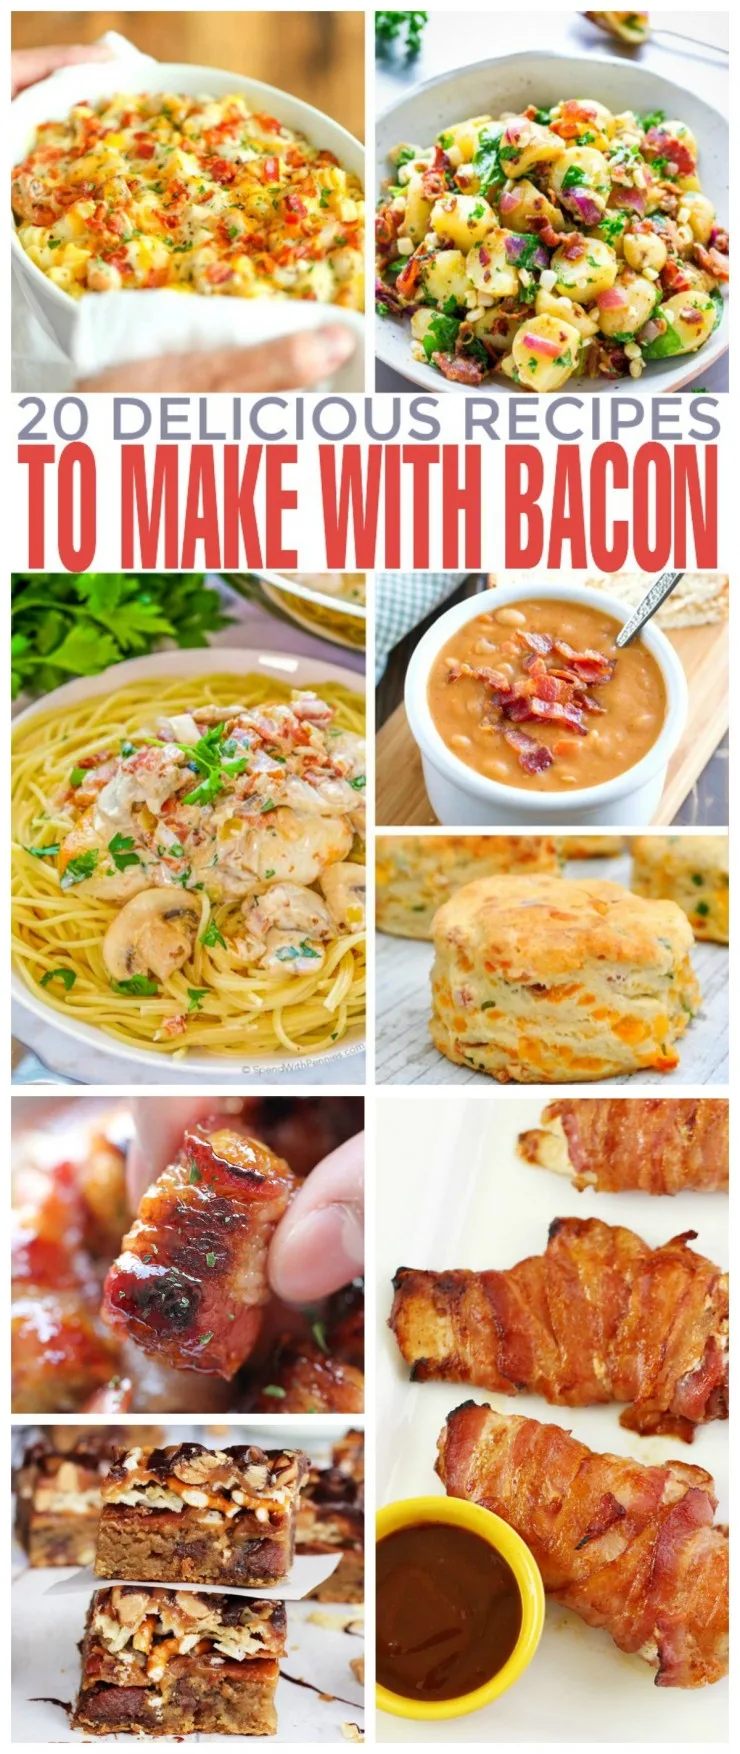 I gathered a collection of 20 delicious recipes you can make with bacon. From delicious potato salads and savoury bacon wrapped tater tot bombs to homemade bean soups and even bacon lo mein, these ideas will take you dinner from boring to fantastic.